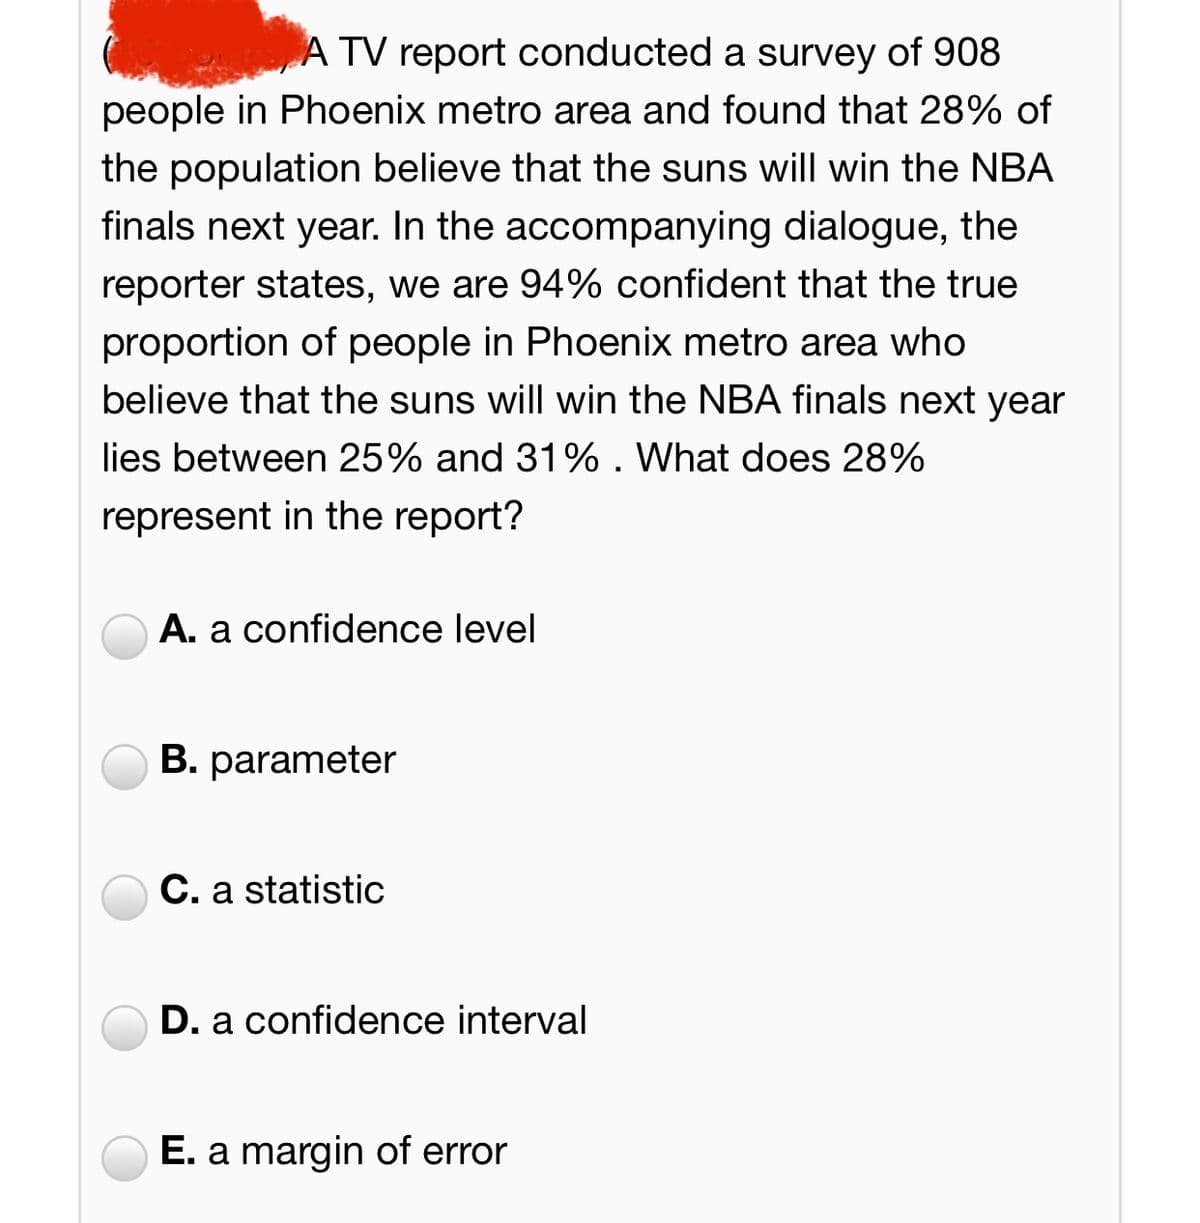 A TV report conducted a survey of 908
people in Phoenix metro area and found that 28% of
the population believe that the suns will win the NBA
finals next year. In the accompanying dialogue, the
reporter states, we are 94% confident that the true
proportion of people in Phoenix metro area who
believe that the suns will win the NBA finals next year
lies between 25% and 31% . What does 28%
represent in the report?
A. a confidence level
B. parameter
C. a statistic
D. a confidence interval
E. a margin of error
